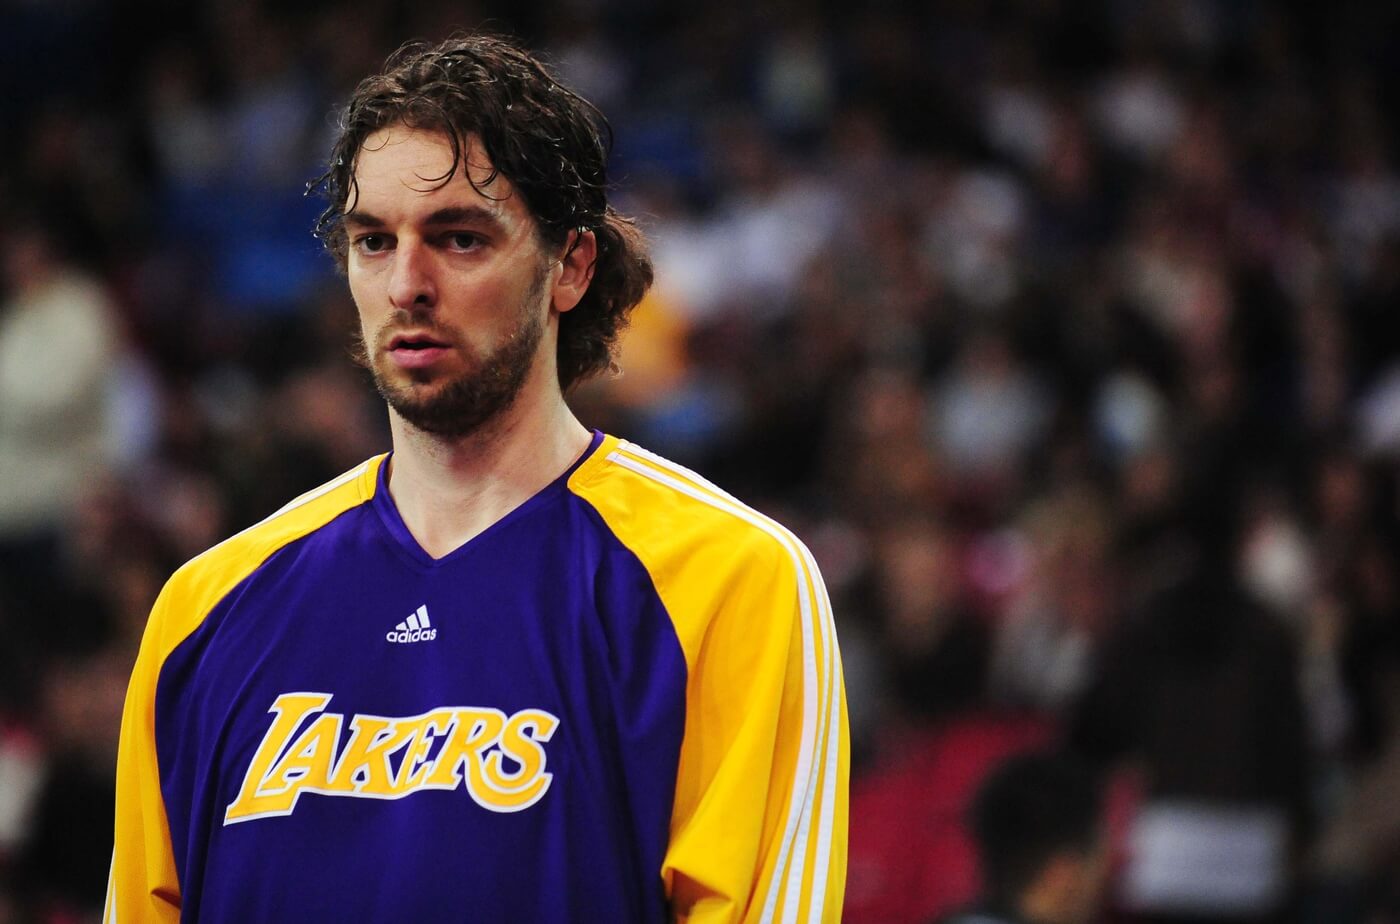 December 26, 2009; Sacramento, CA, USA; Los Angeles Lakers forward Pau Gasol (16) warms up before the game against the Sacramento Kings at Arco Arena. The Lakers defeated the Kings 112-103 in double overtime. Mandatory Credit: Kyle Terada-USA TODAY Sports